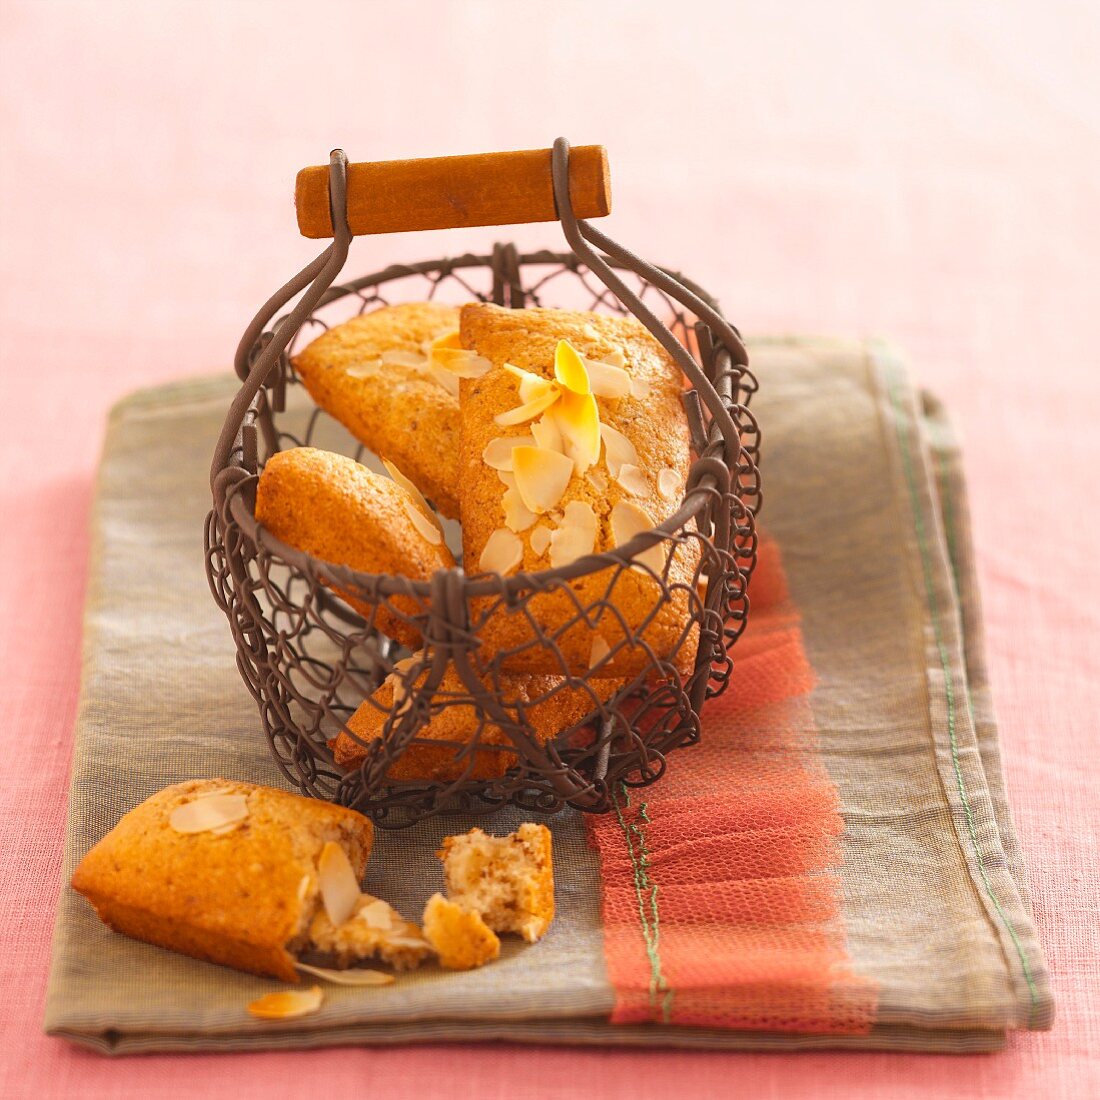 Financiers (French almond biscuits) with flaked almonds